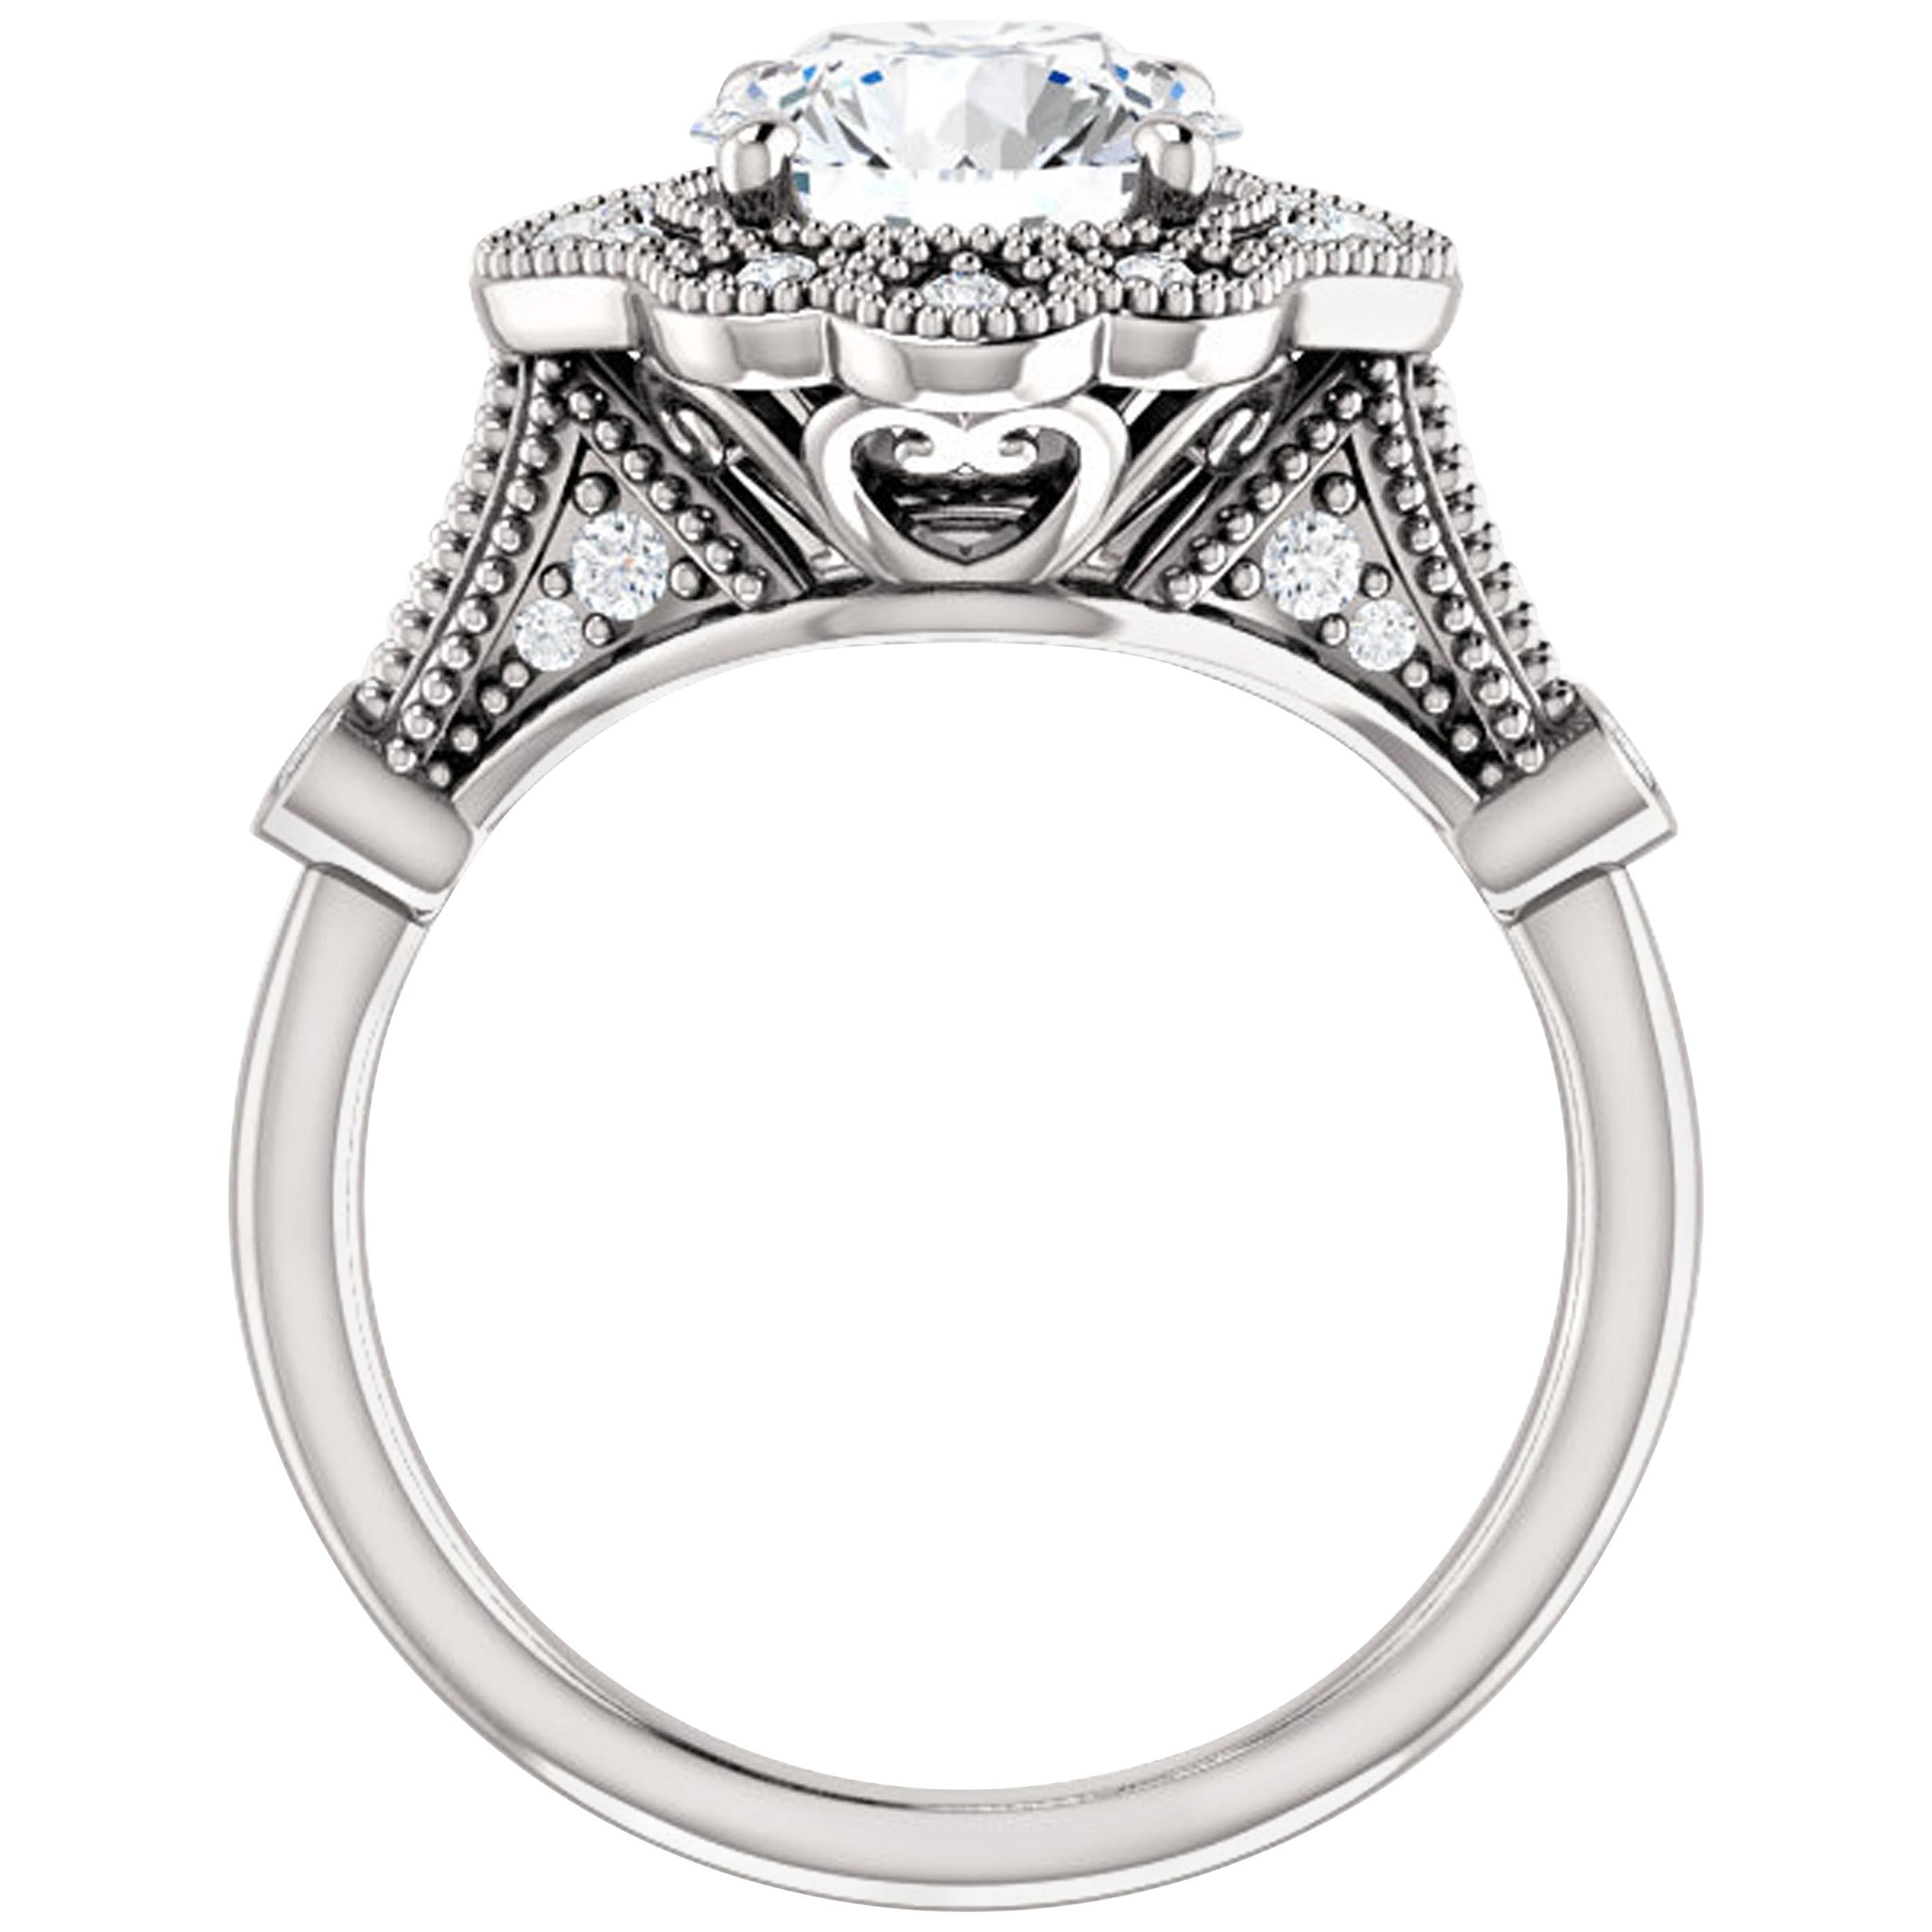 Glamorous shimmering diamonds surround the halo, amplifying the Forever One moissanite center stone. Additional diamonds dance aklong the shank of this vintage inspired engagement ring. Additional milgrain detailing adds heirloom appeal. Striking